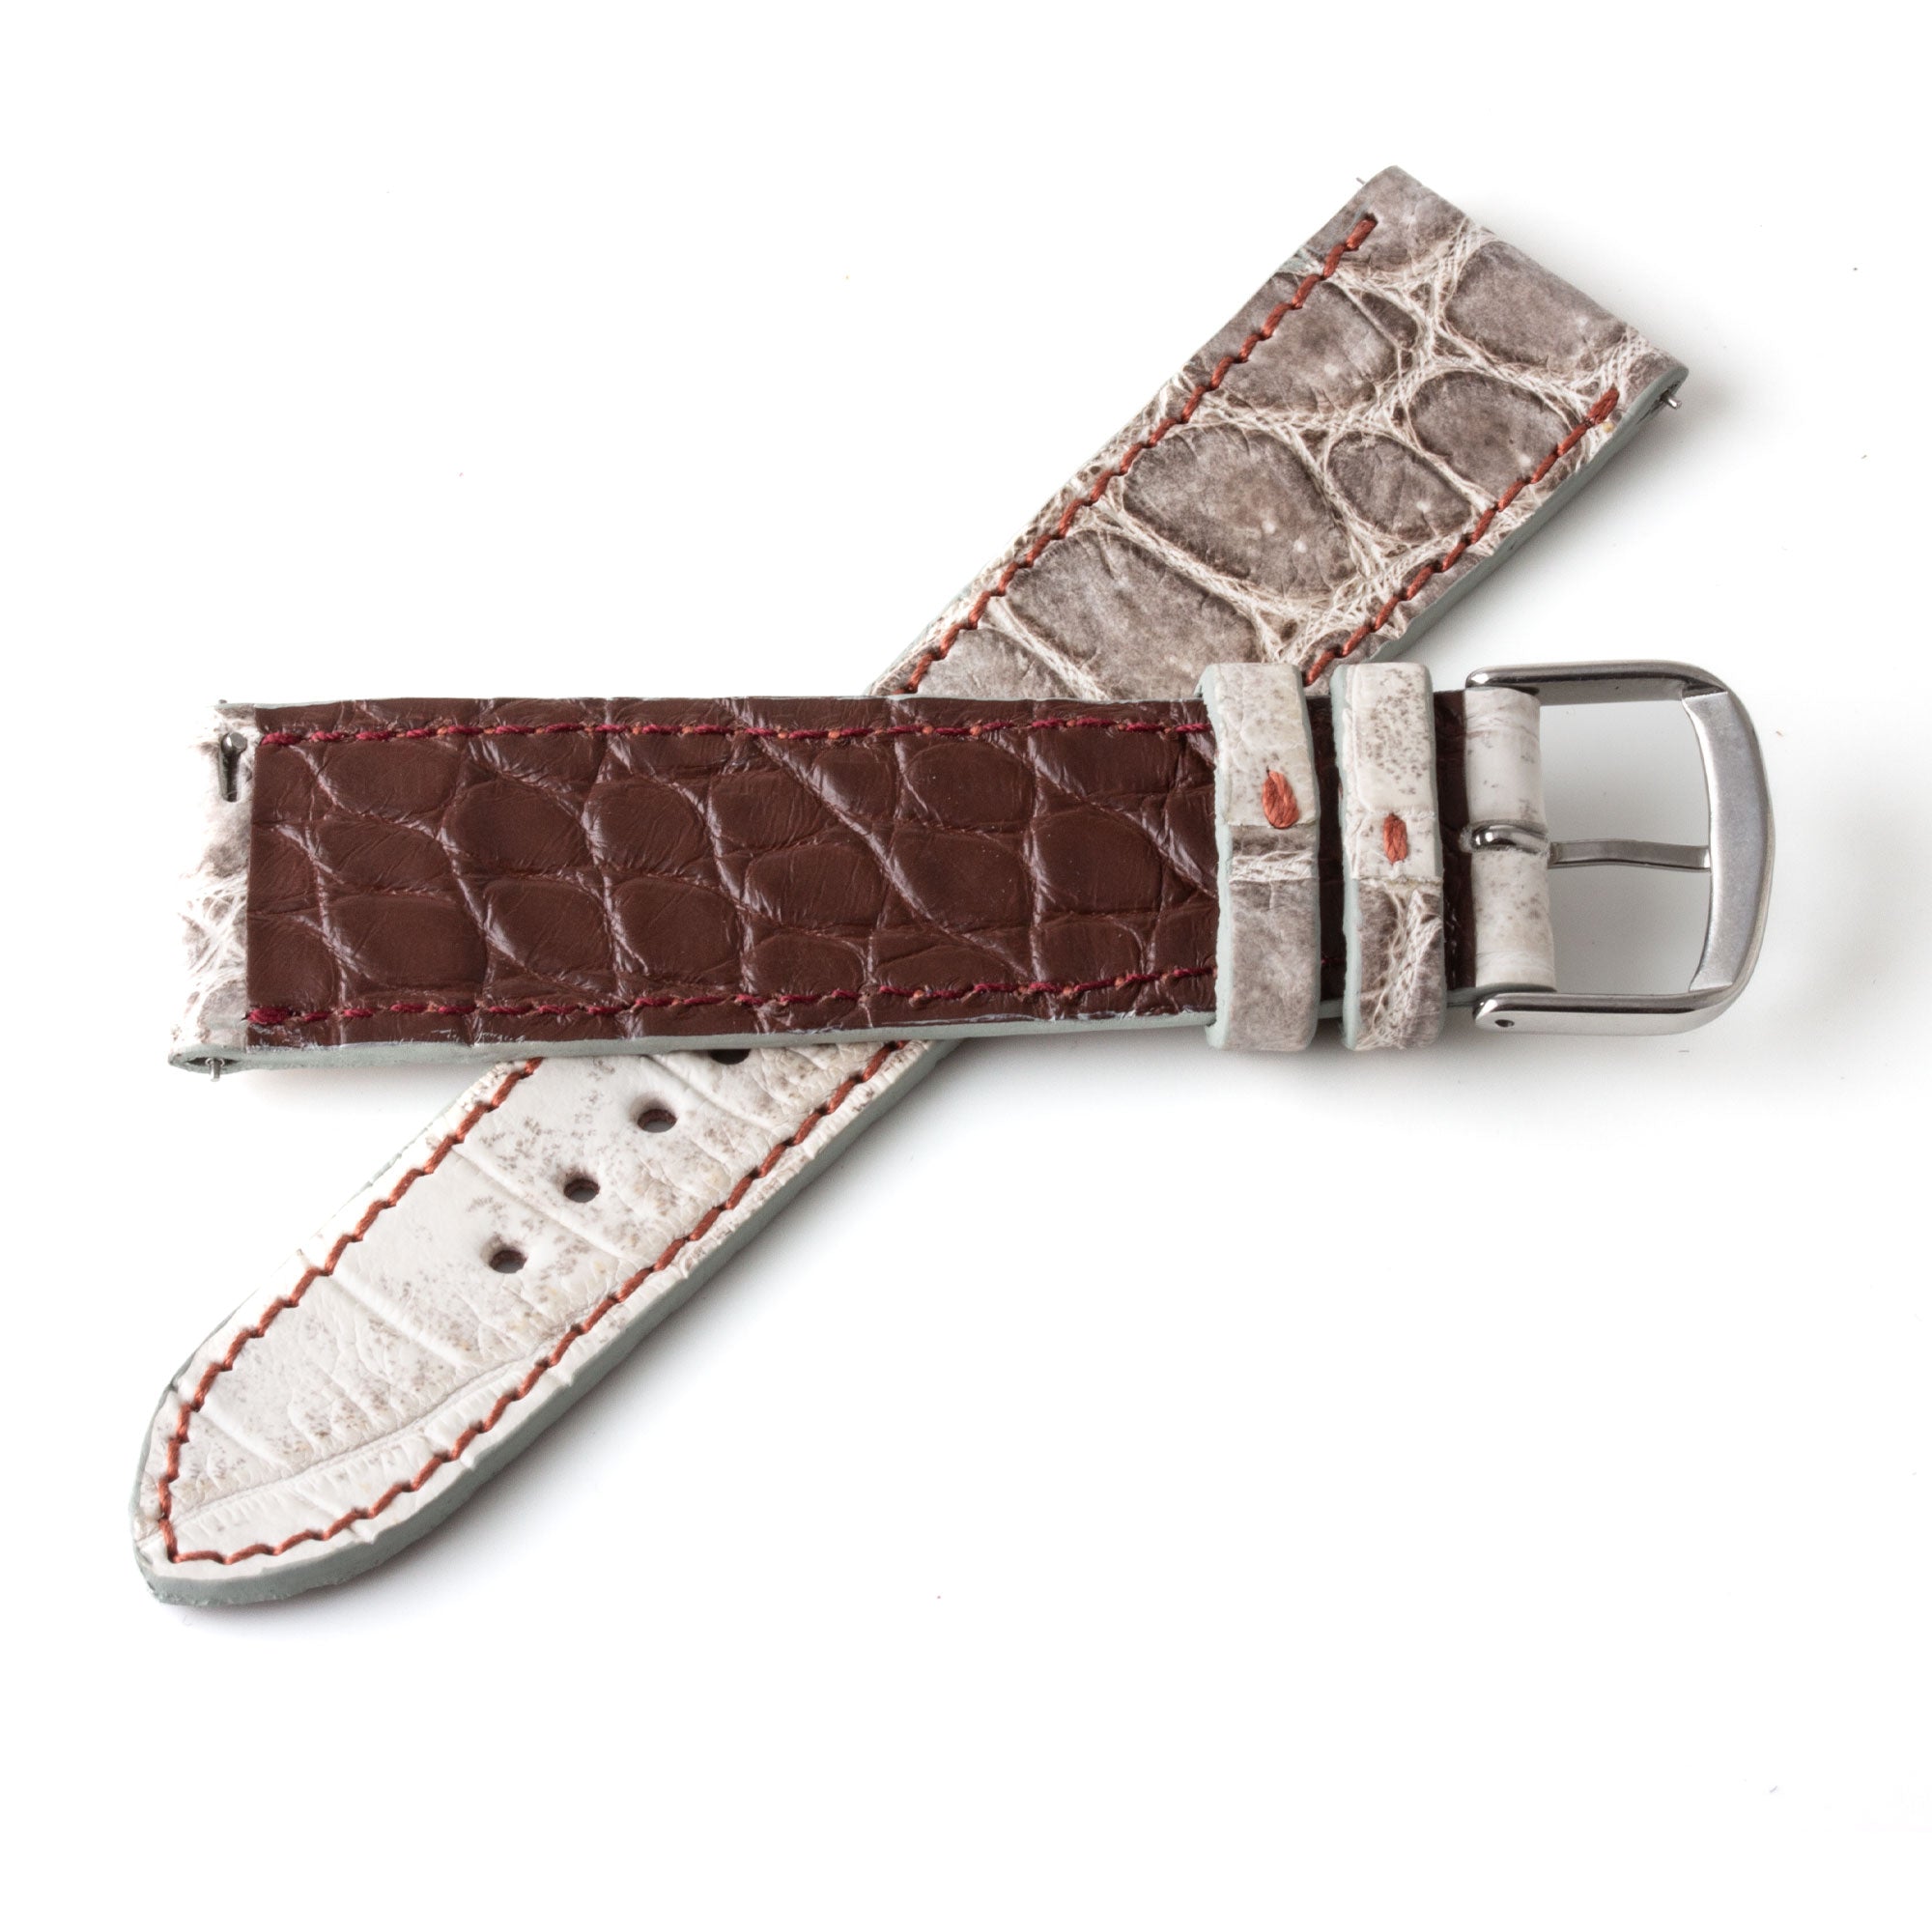 Alligator "Solo" leather watch band - 22mm width (0.87 inches) / Size M (n° 5)